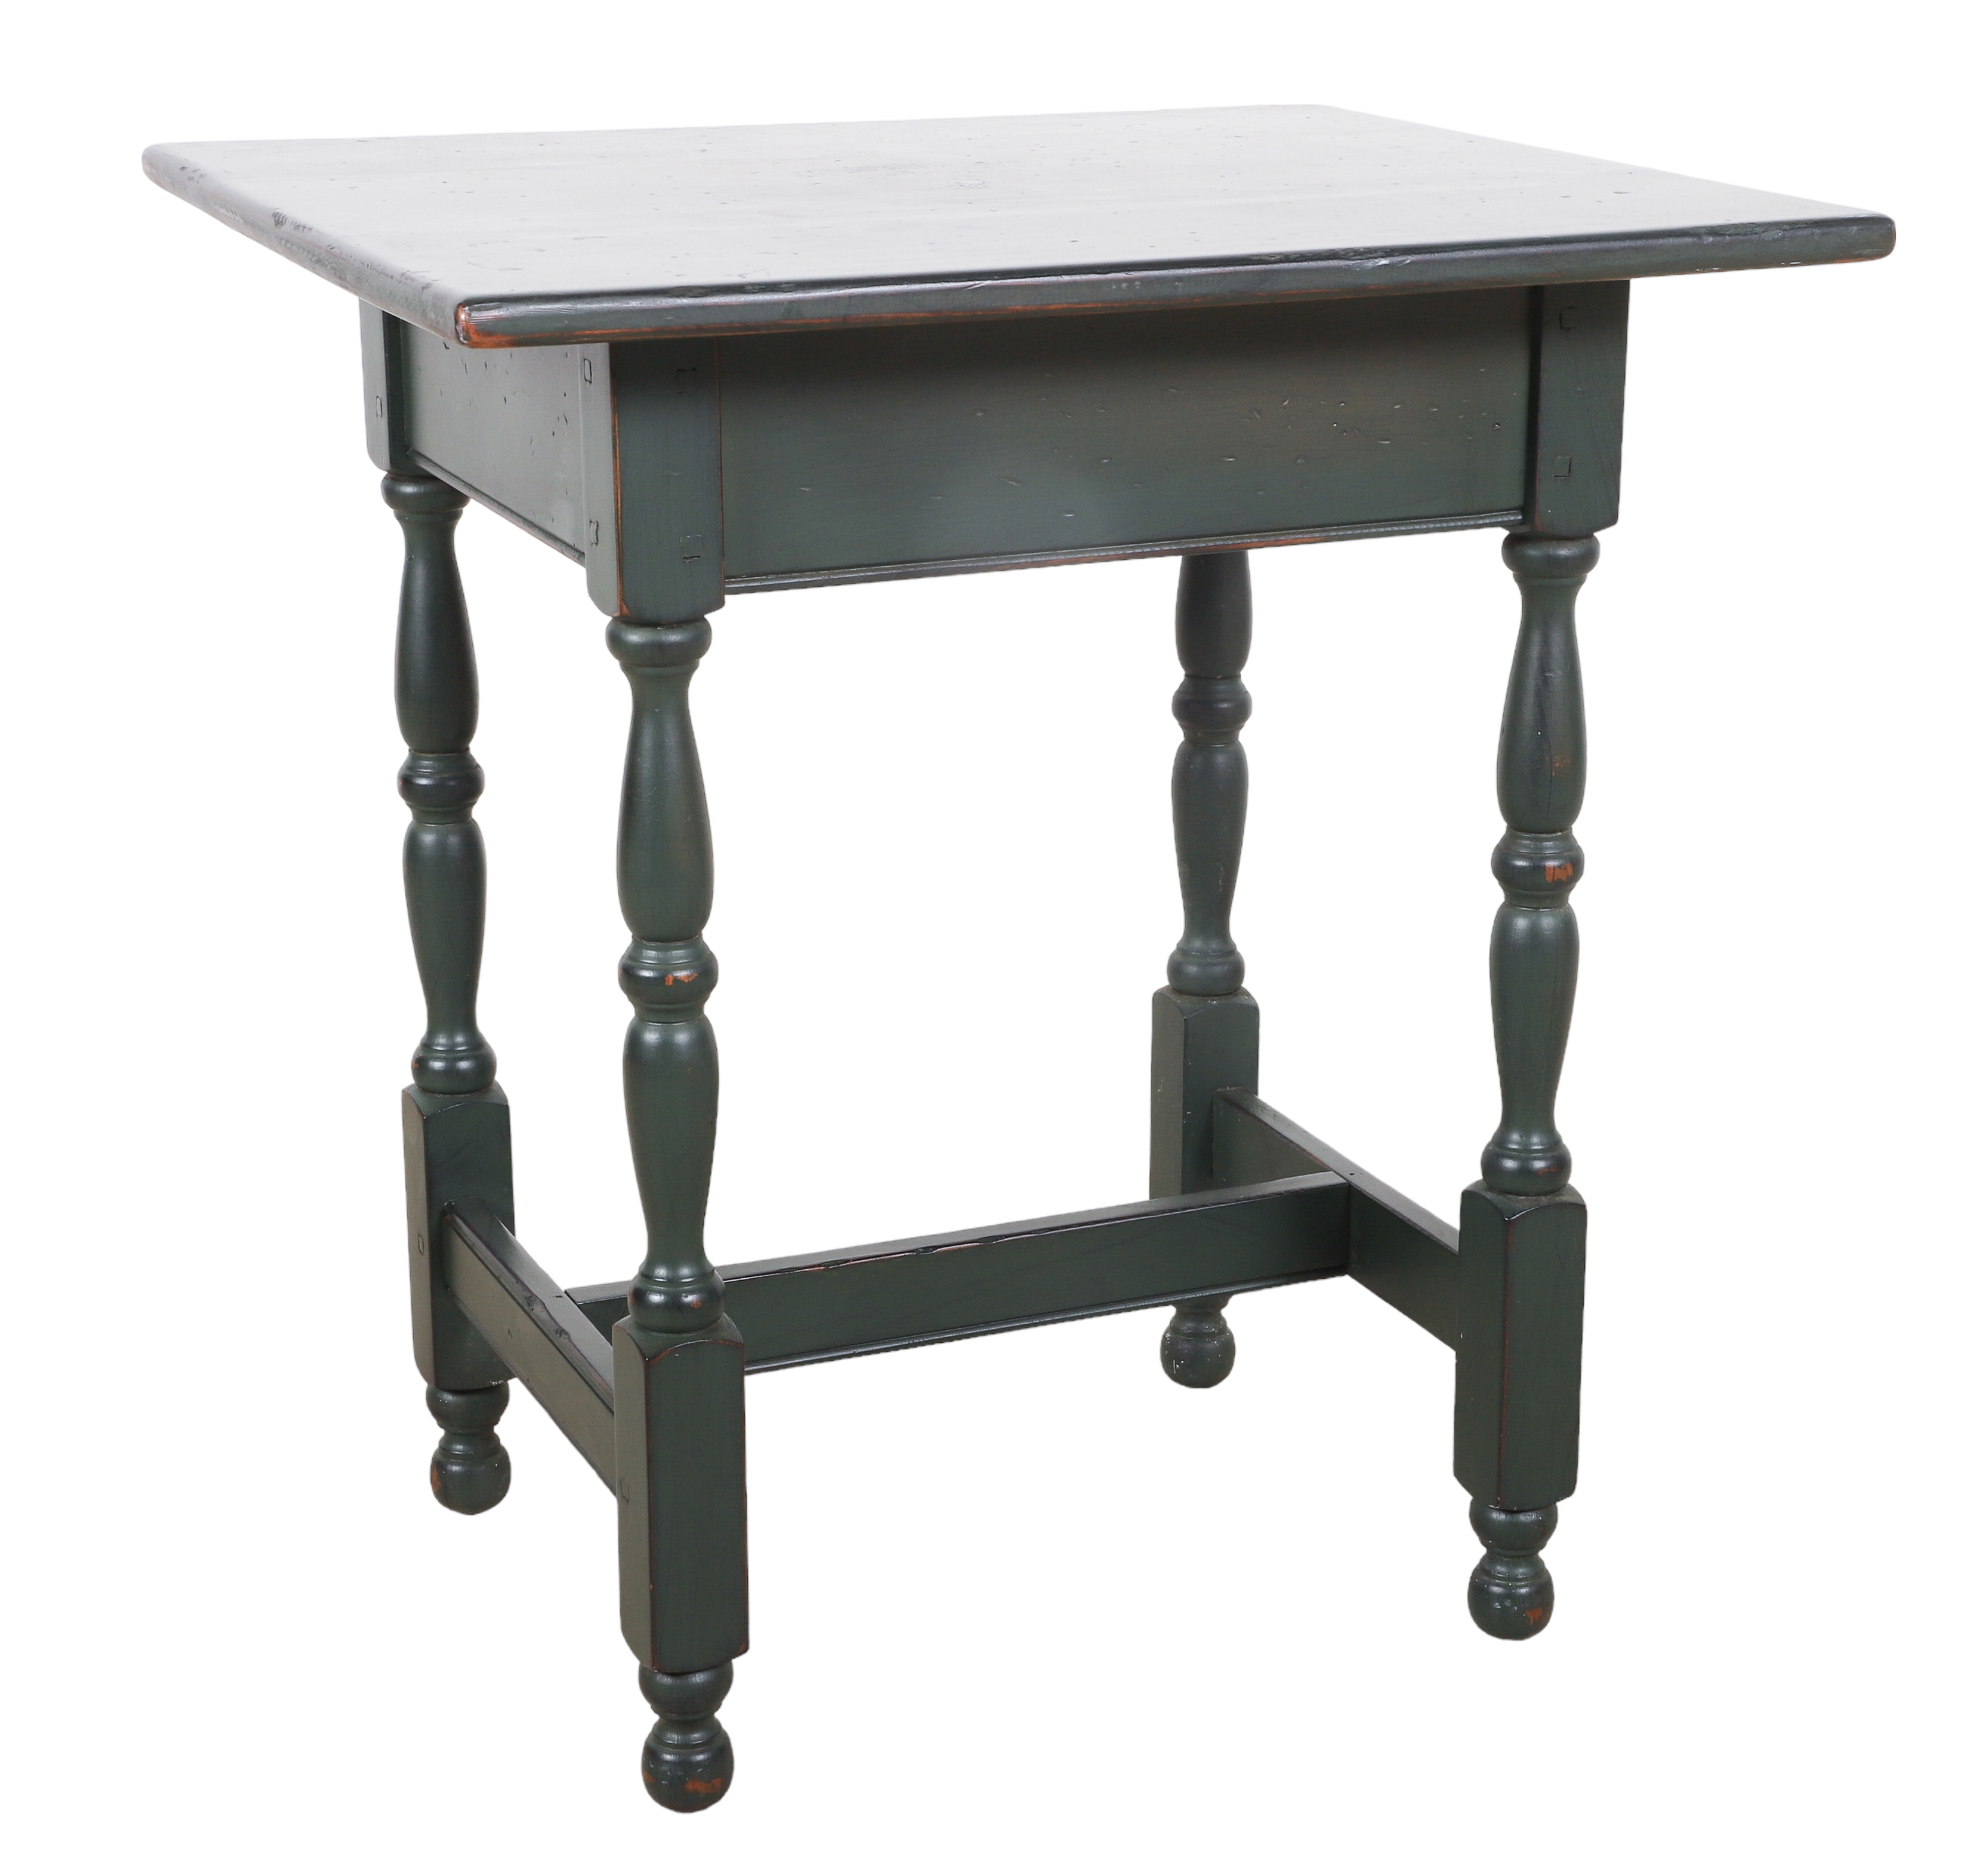 Sheraton style painted side table,